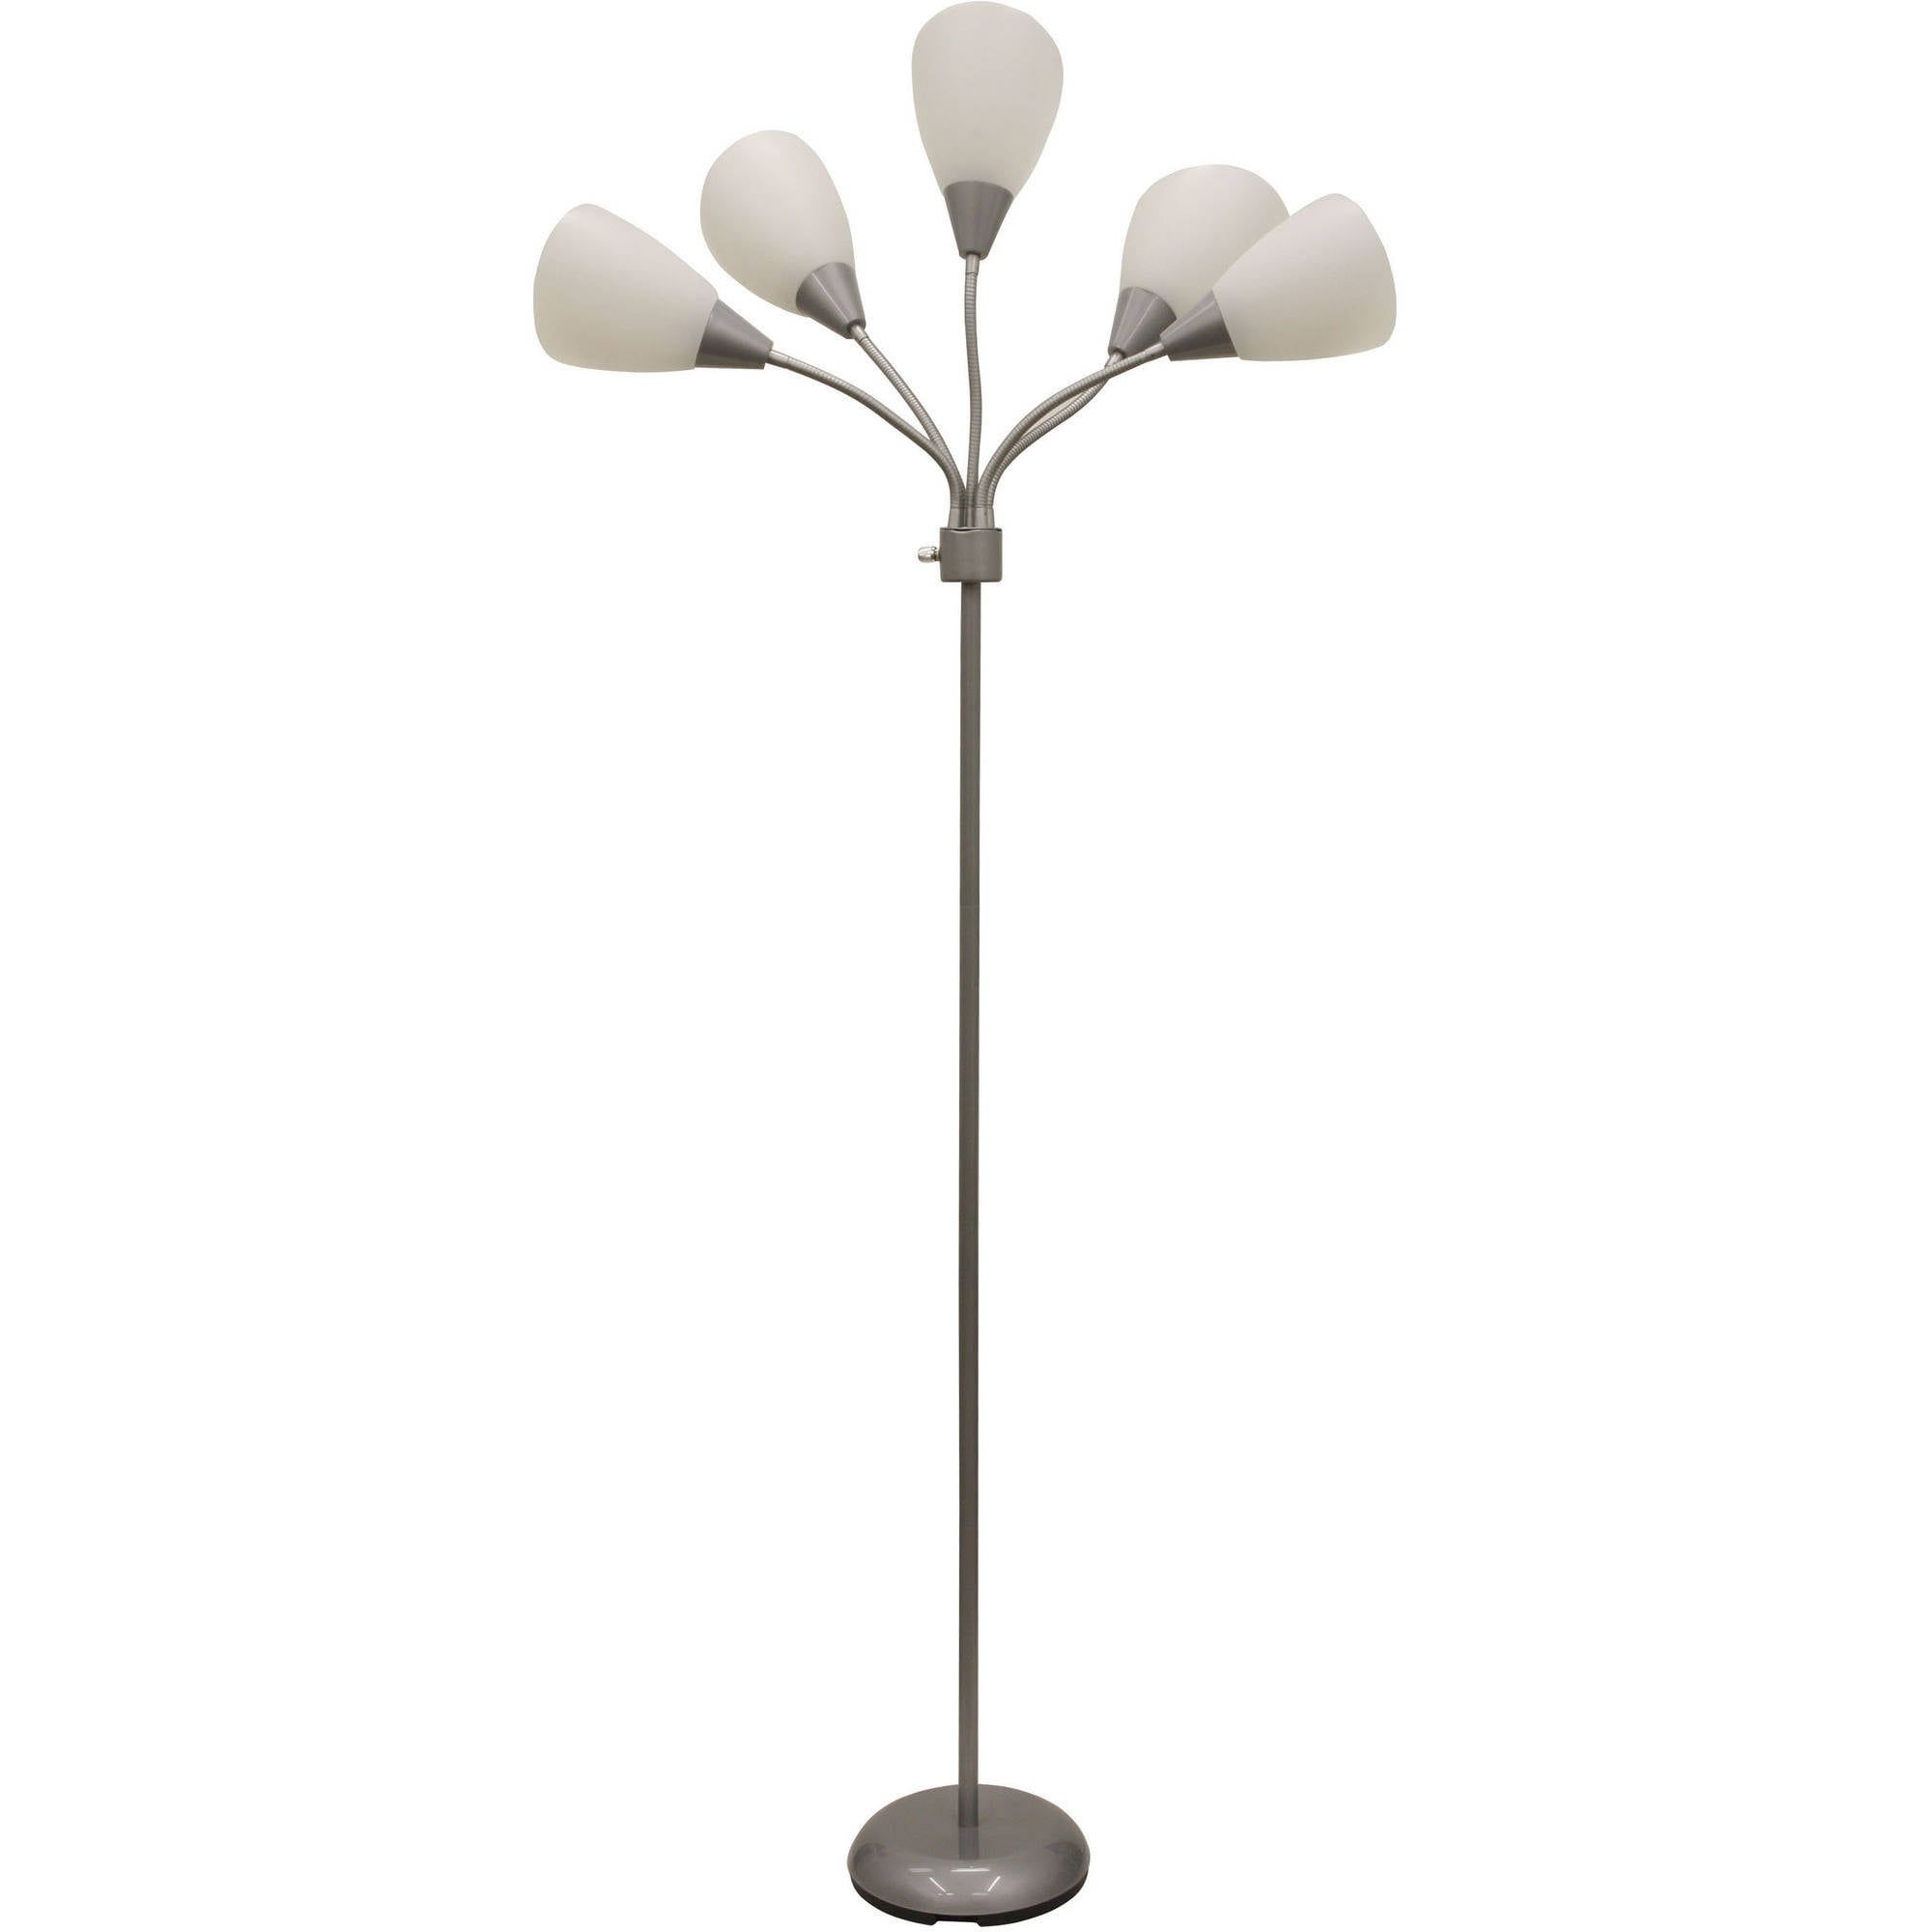 Popular Mainstays 5 Light Multihead Floor Lamp, Silver With White Shade And A Metal  Base – Walmart Throughout 5 Light Floor Lamps (View 2 of 15)